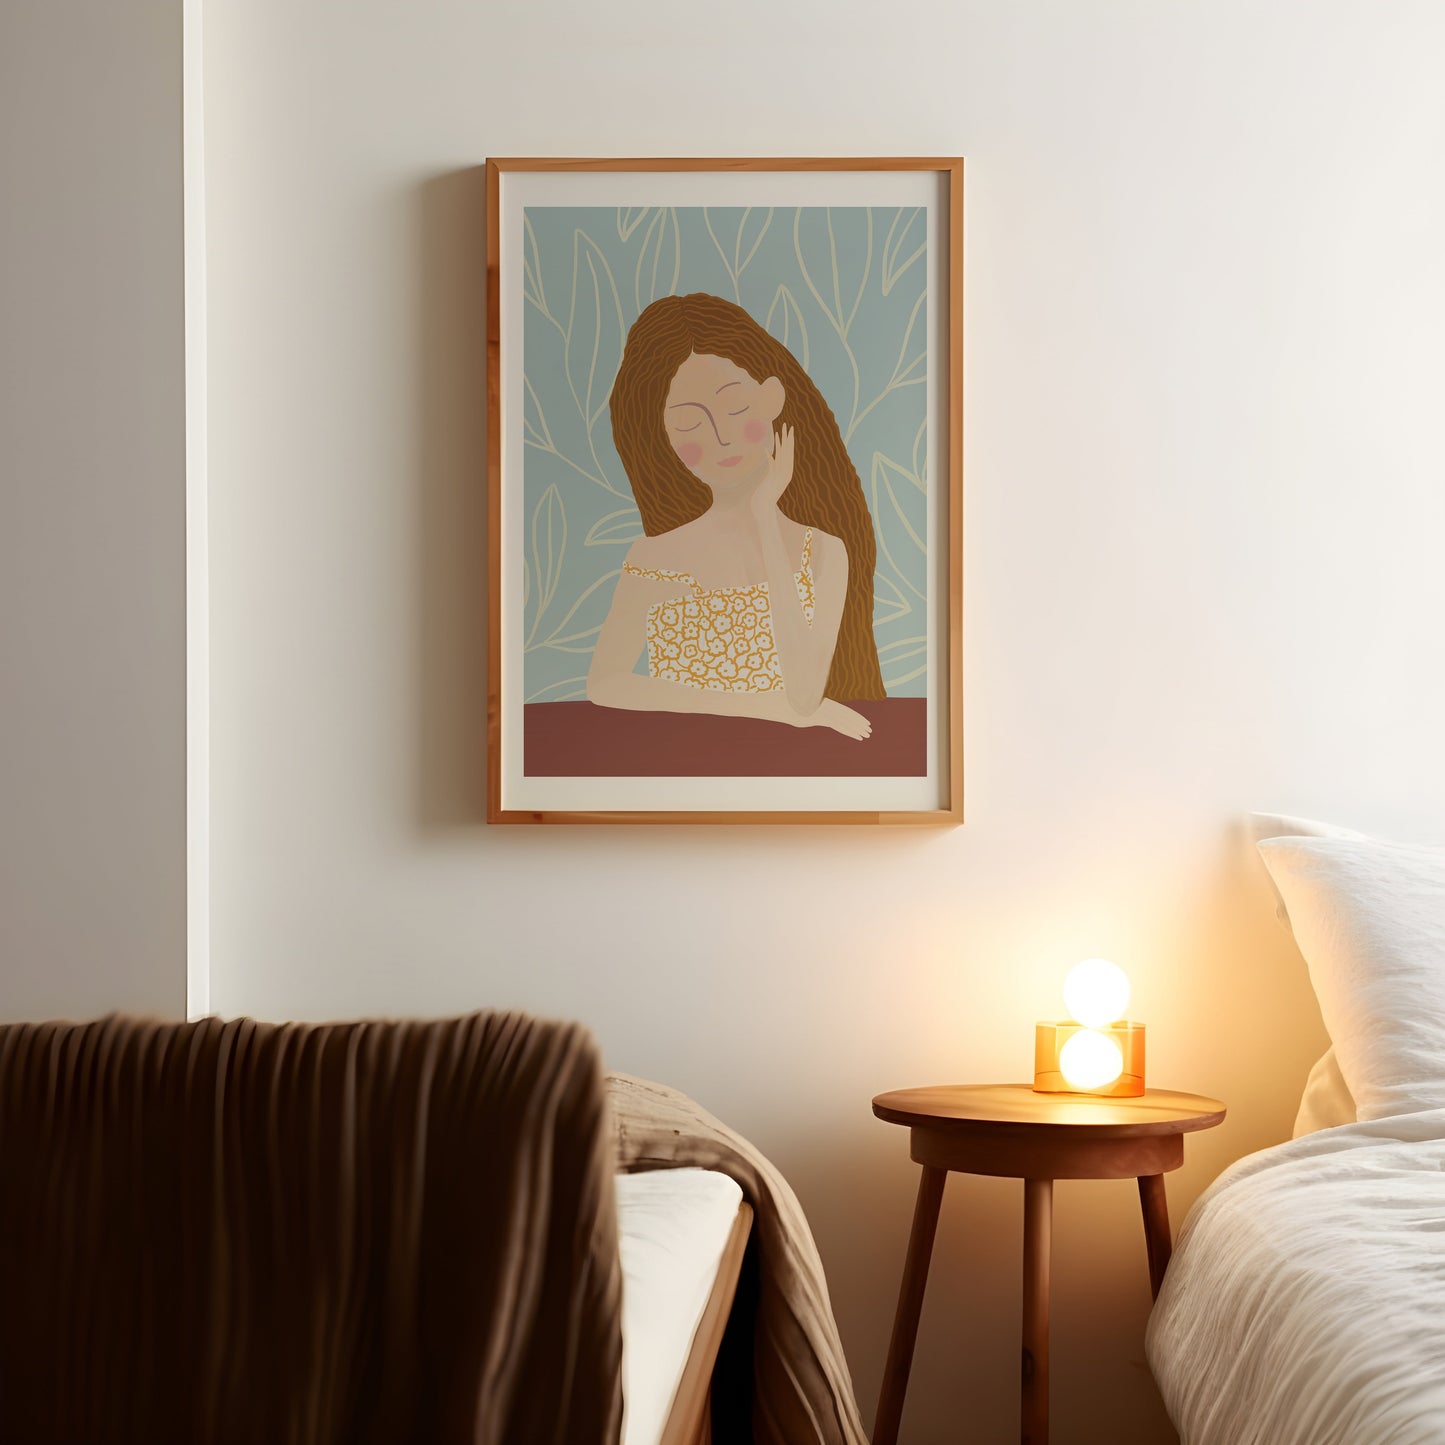 a picture of a woman on a wall above a bed